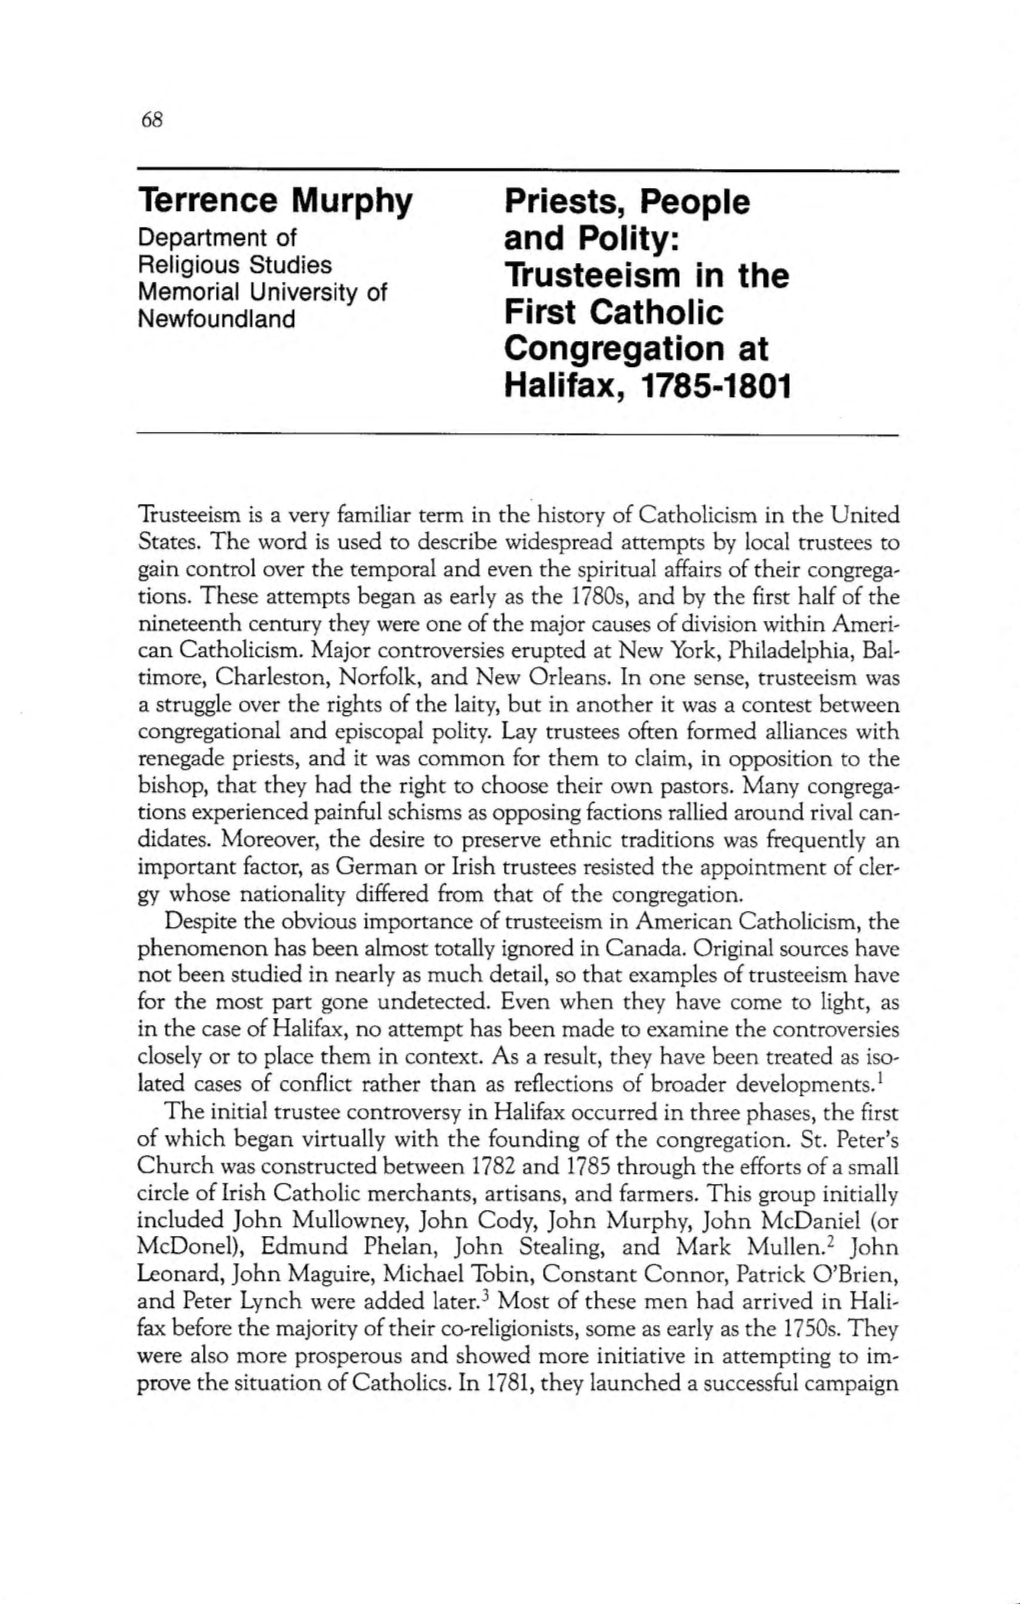 Trusteeism in the First Catholic Congregation at Halifax, 1785-1801